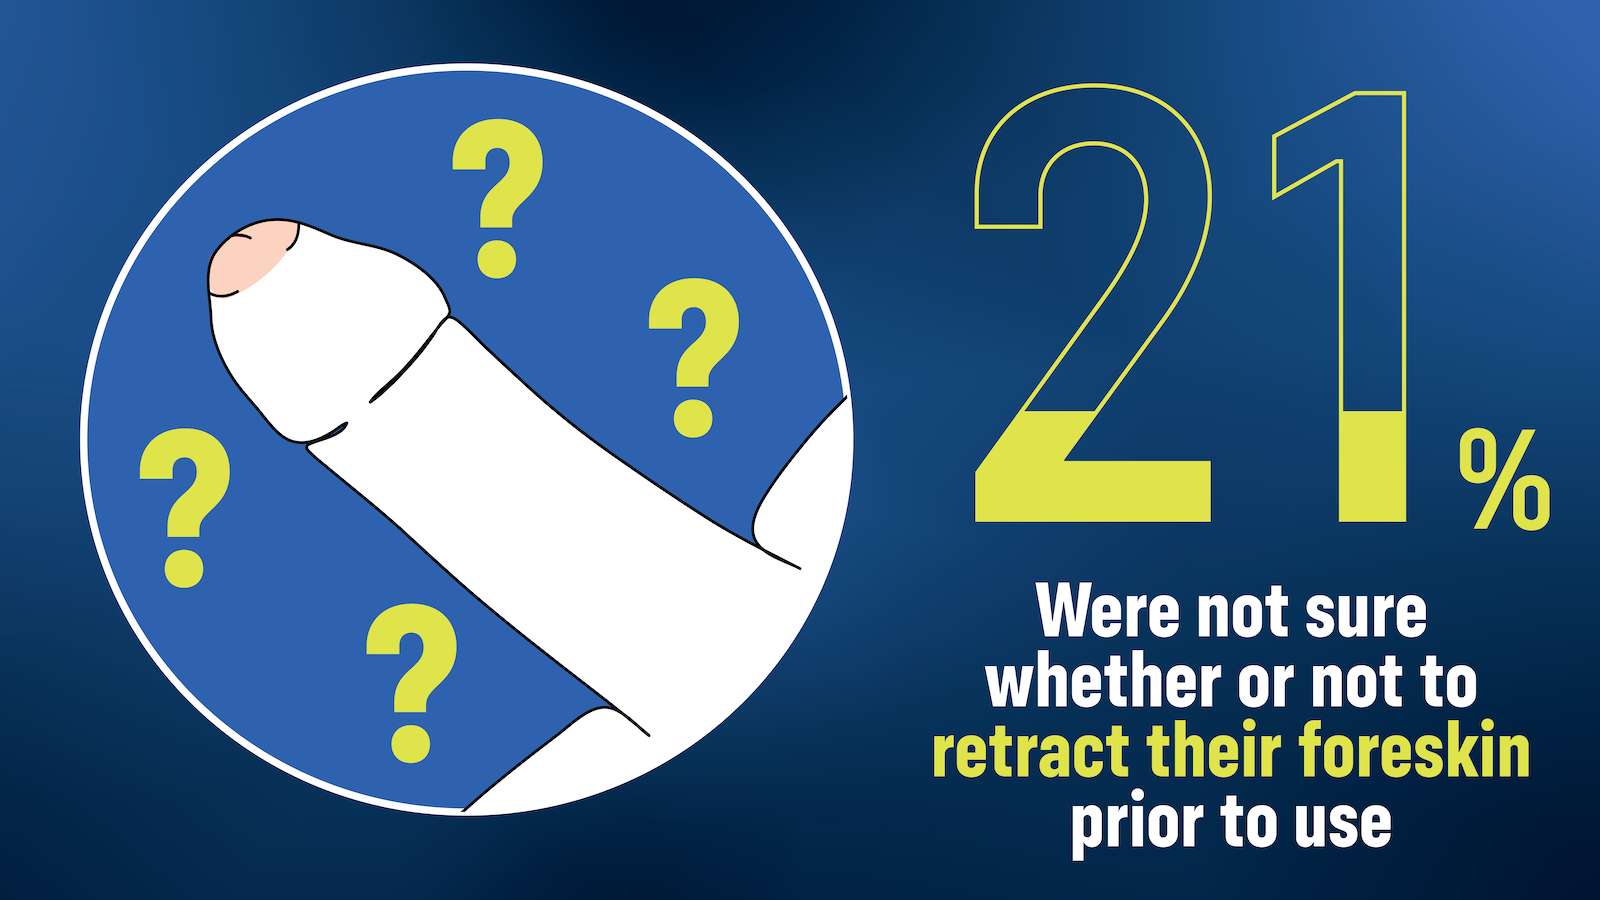 21% were not sure whether of not to retract their foreskin prior to condom use